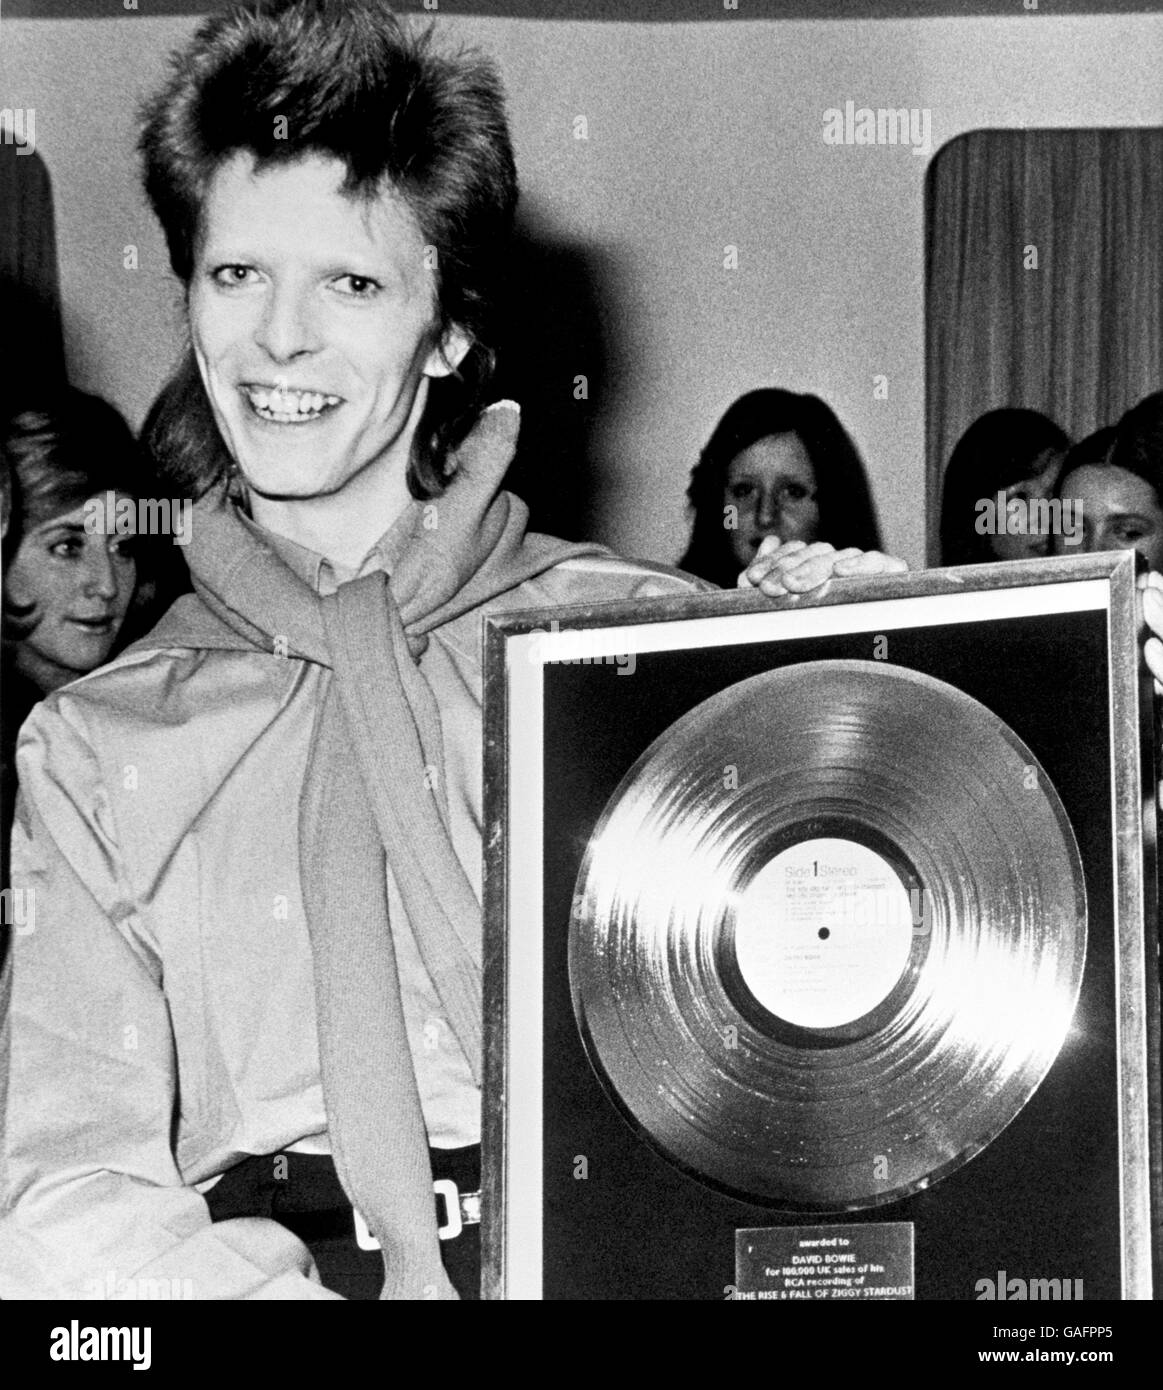 Music - David Bowie - 1973. Solo artist David Bowie with his gold disc. Stock Photo